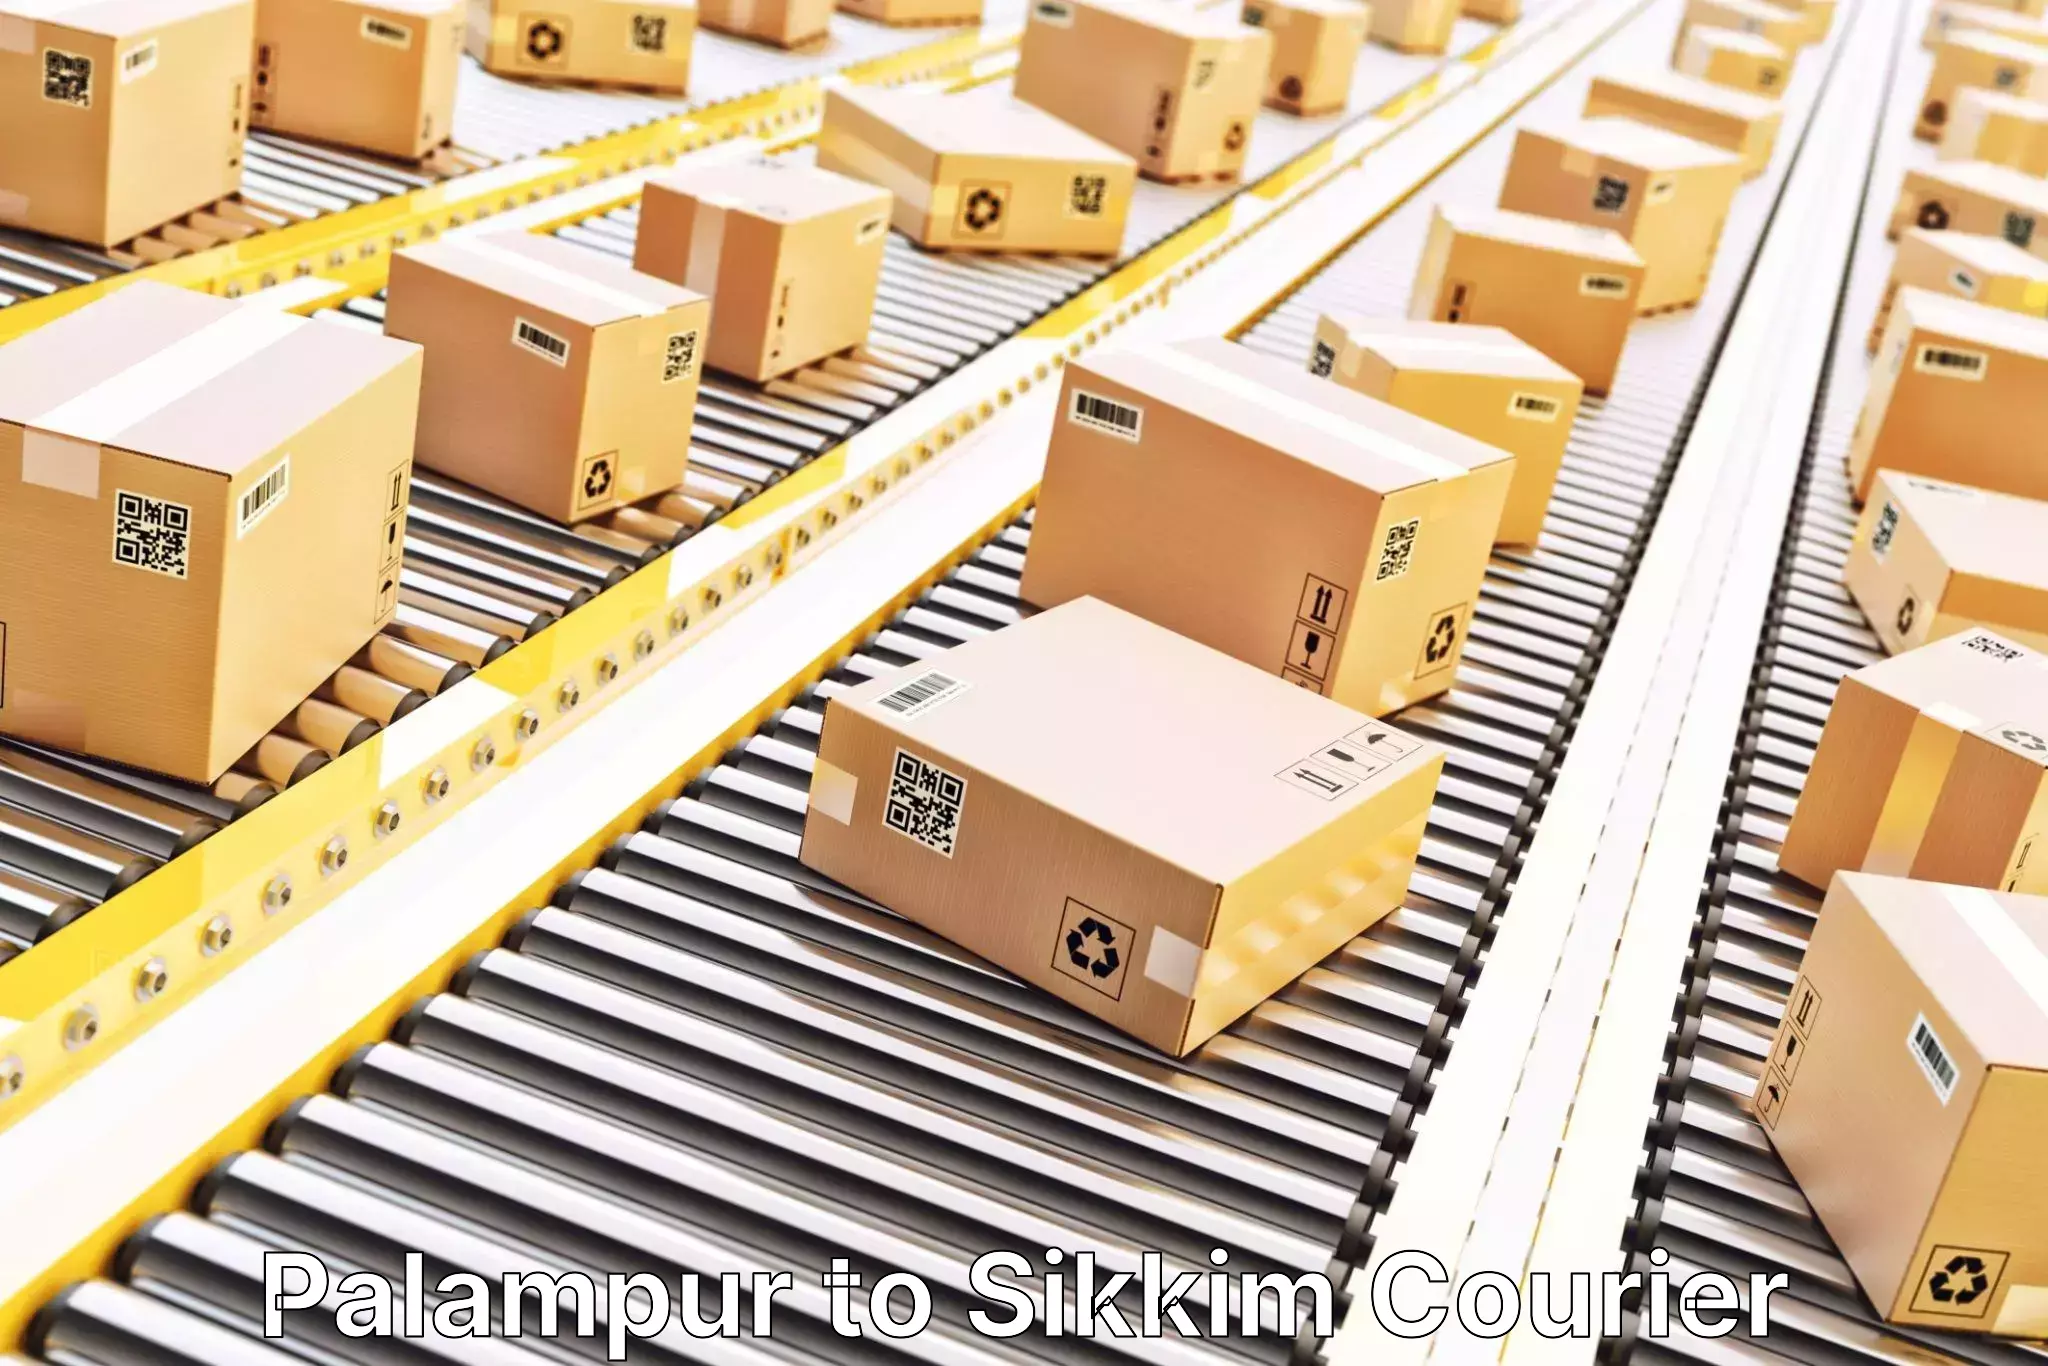 Global shipping networks Palampur to East Sikkim